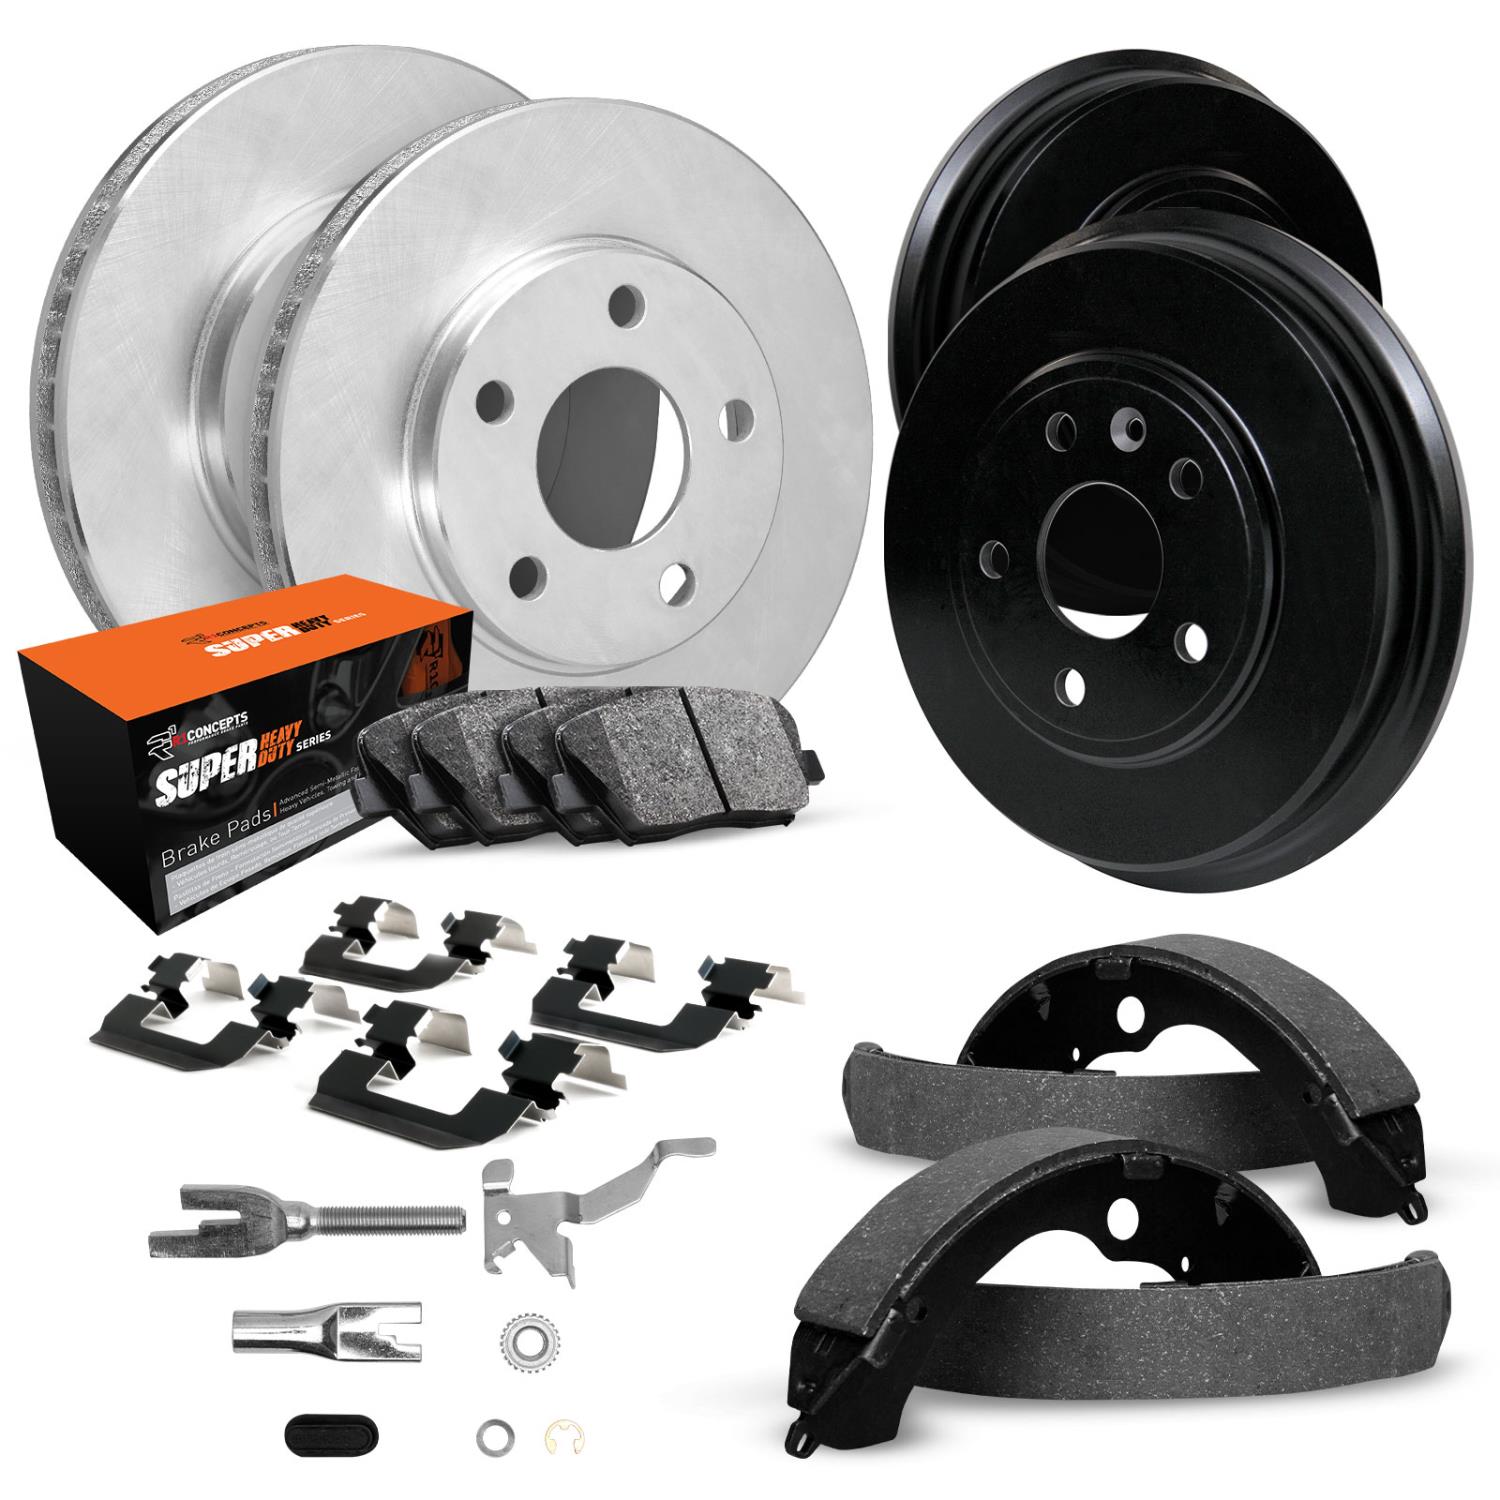 E-Line Blank Brake Rotor & Drum Set w/Super-Duty Pads, Shoes, Hardware, & Adjusters, 1980-1980 Ford/Lincoln/Mercury/Mazda